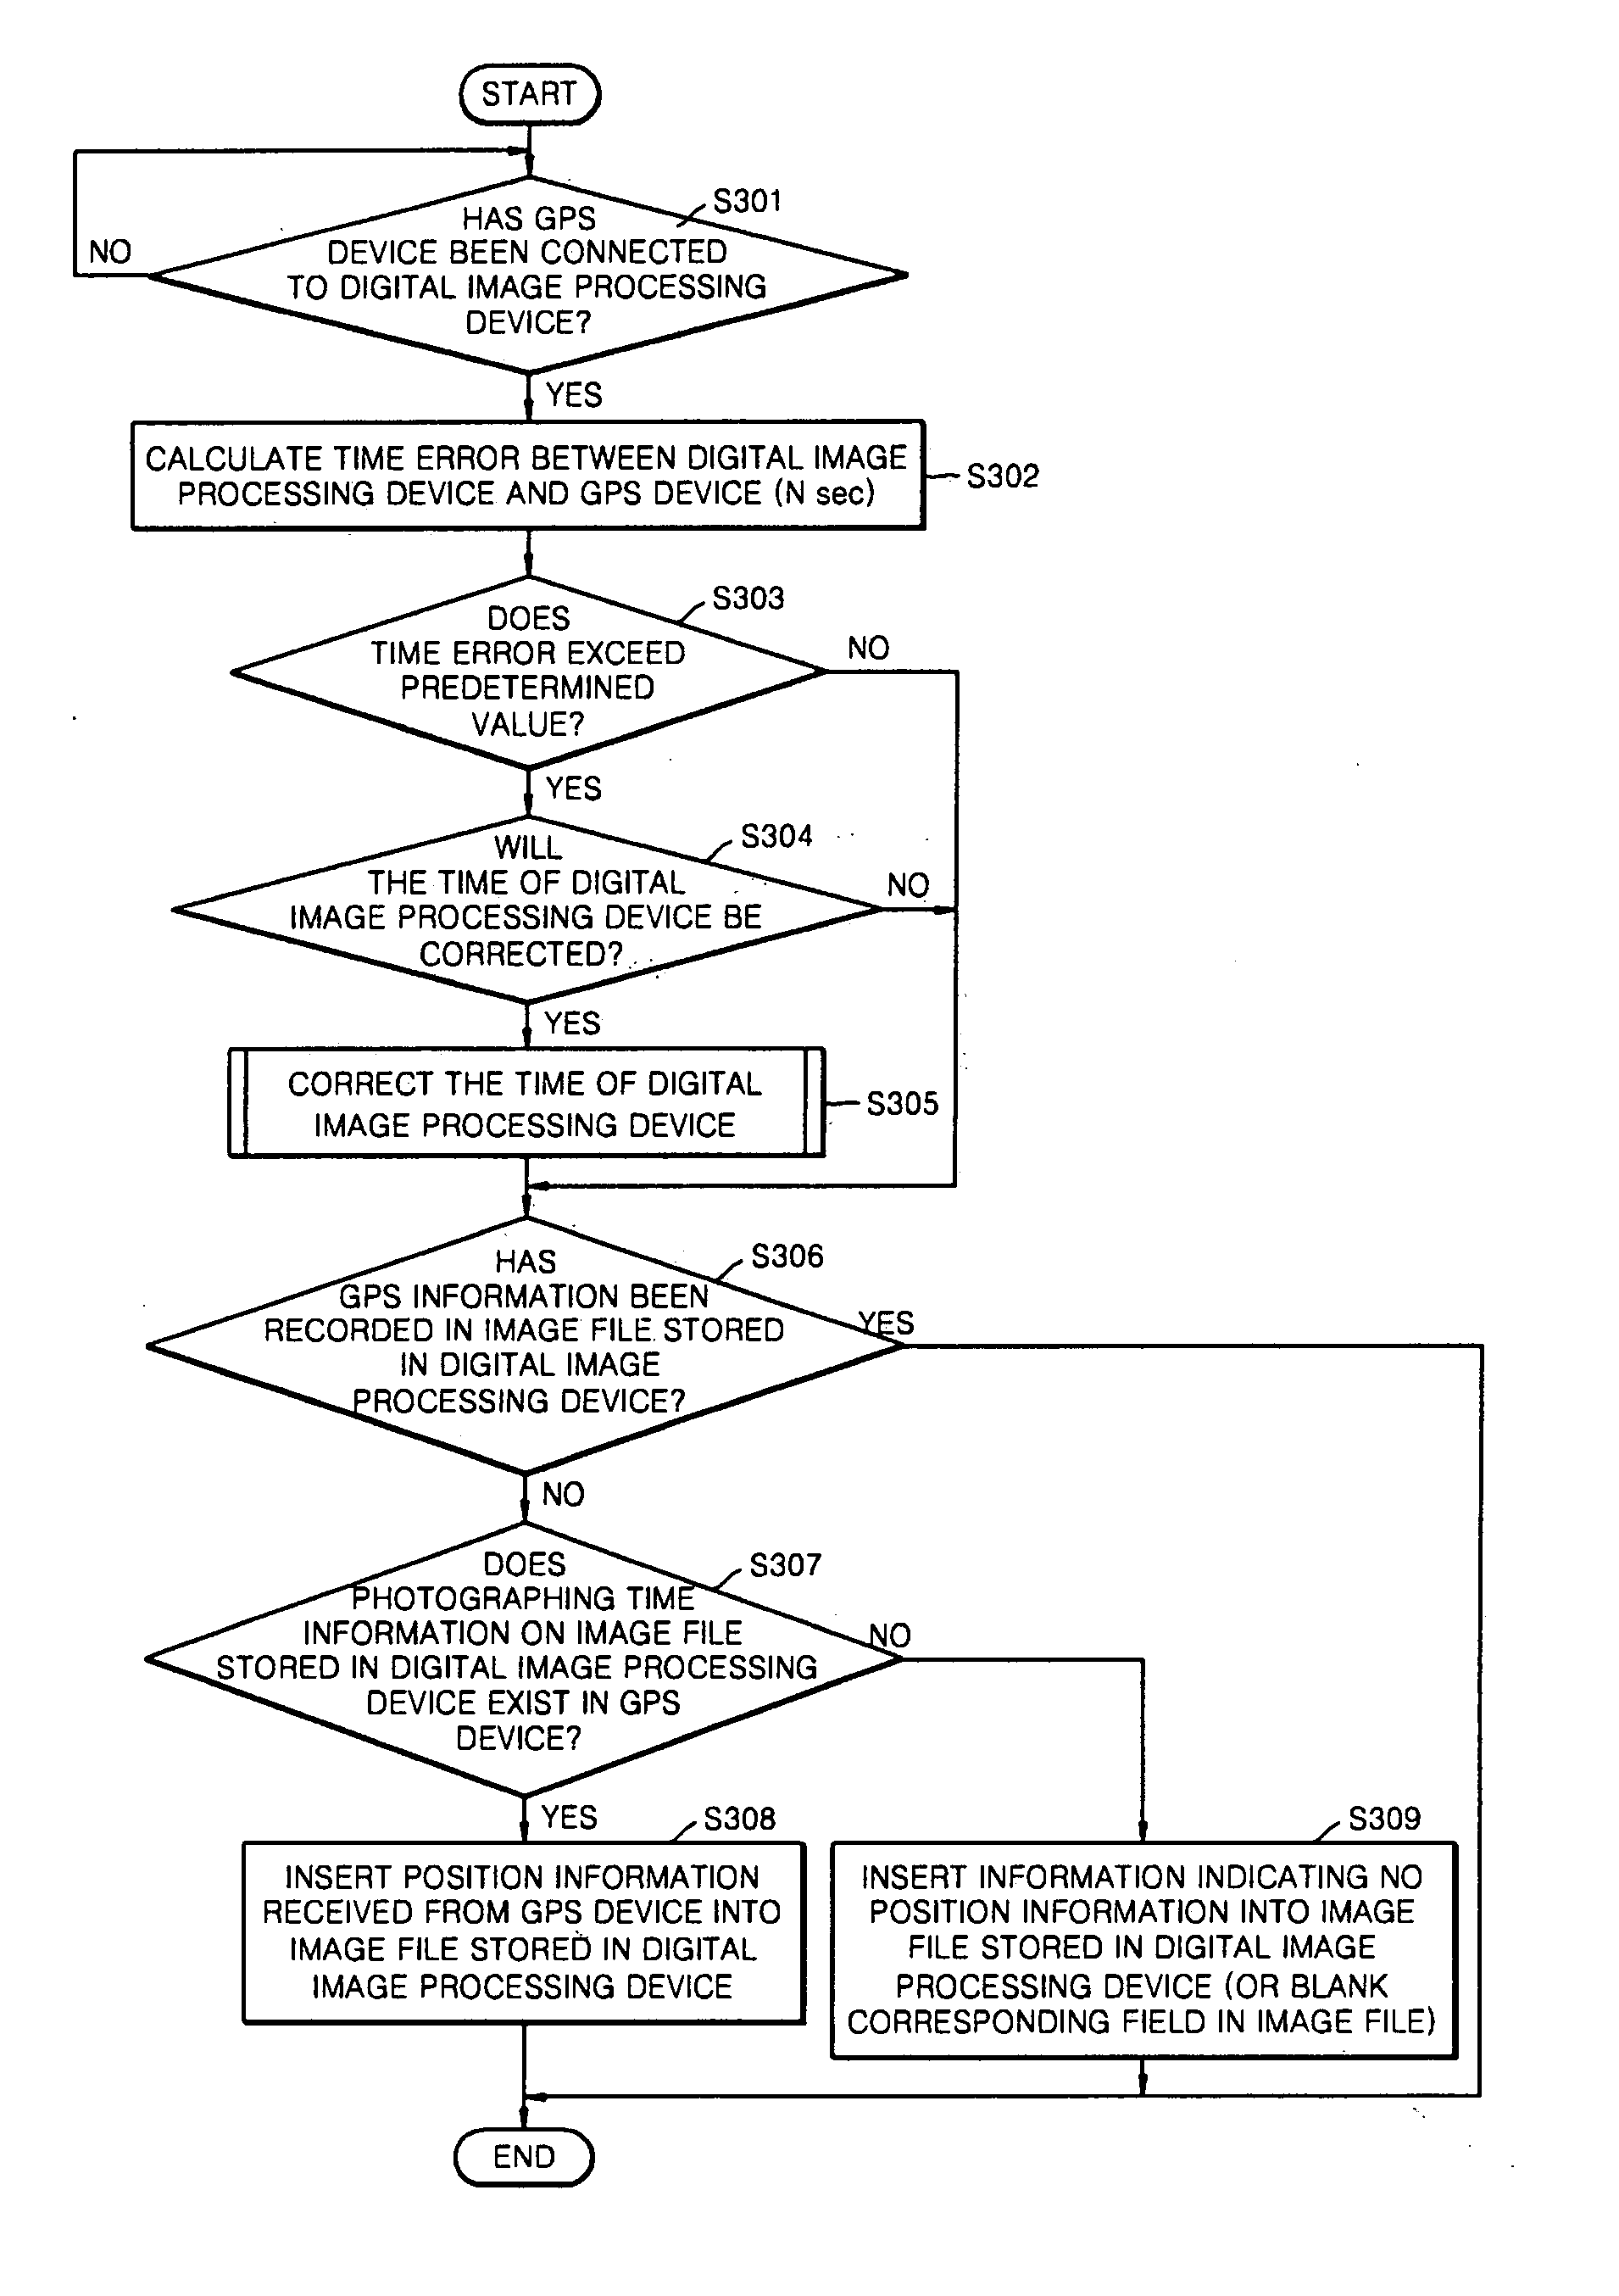 System and method for inserting position information into image